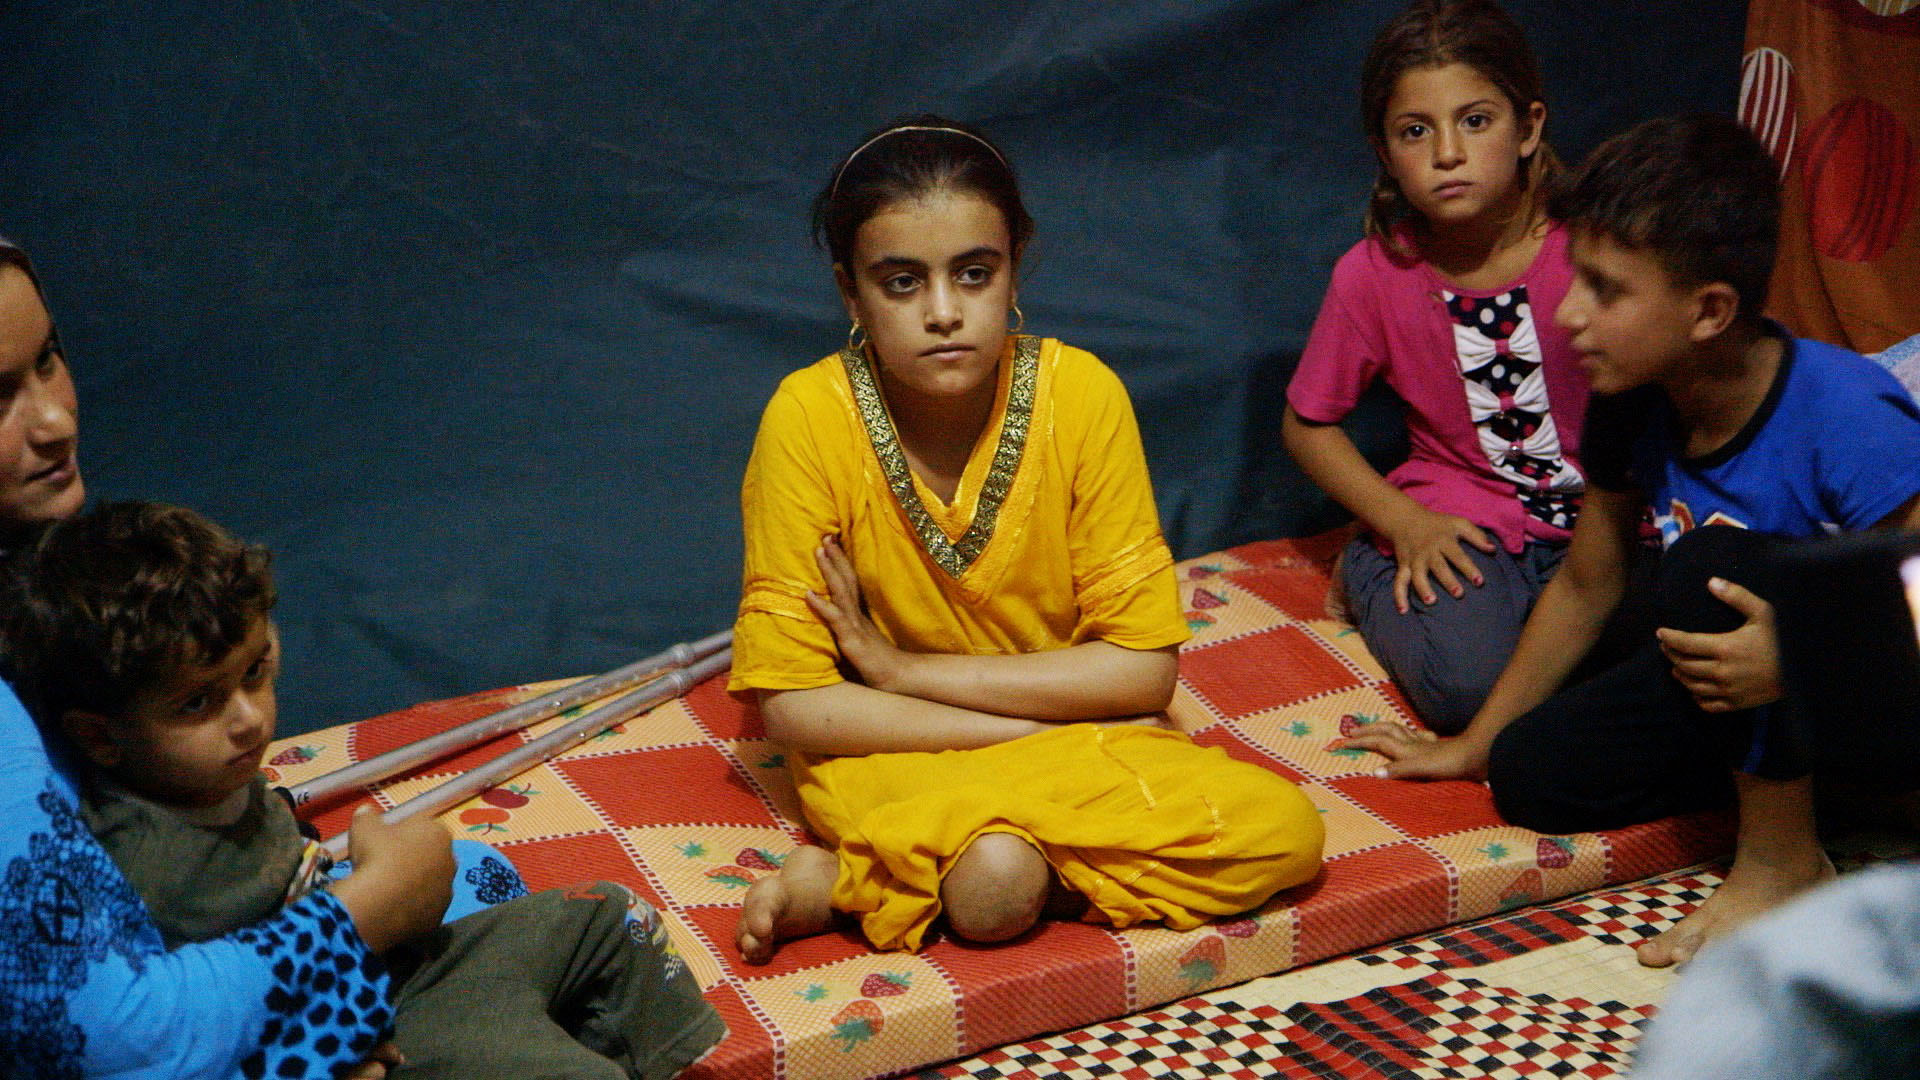 A young girl who lost her leg to an Islamic State attack fled with her family, and is now living in a camp. The conflict has displaced more than 7.6 million people in Syria, and more than 3.3 million in Iraq. 